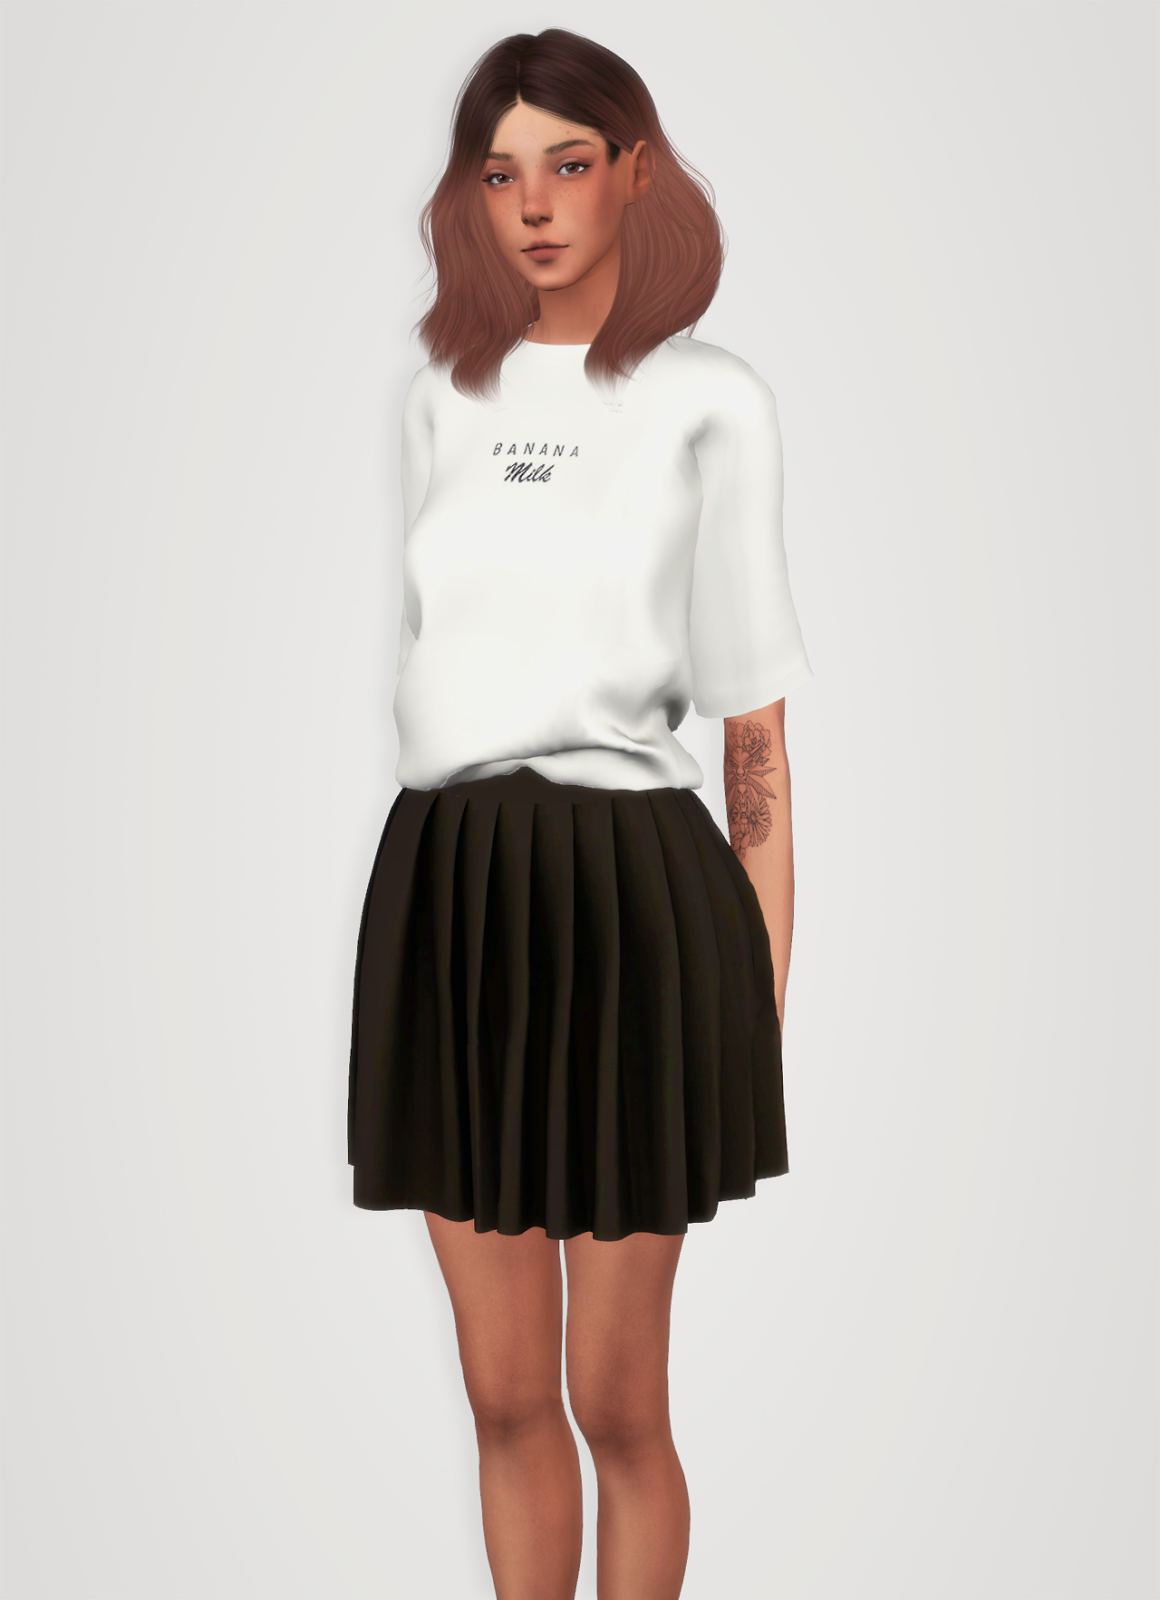 Sims 4 Clothing